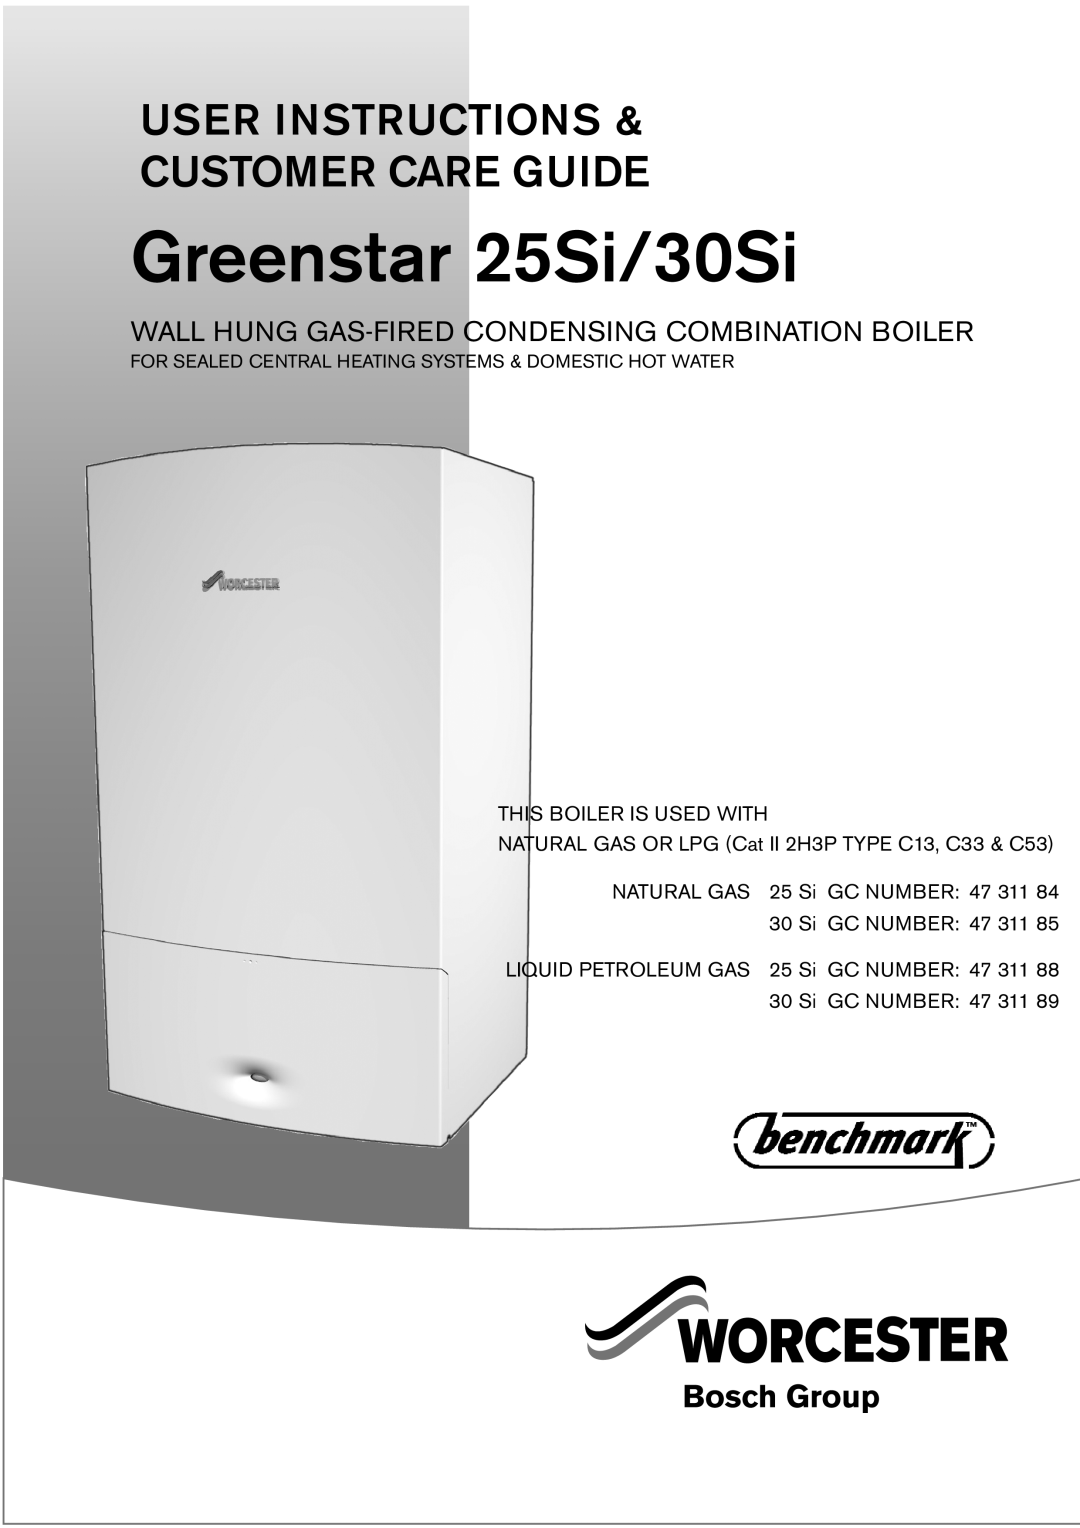 Bosch Appliances manual Greenstar 25Si/30Si, User Instructions Customer Care Guide, This Boiler Is Used With 